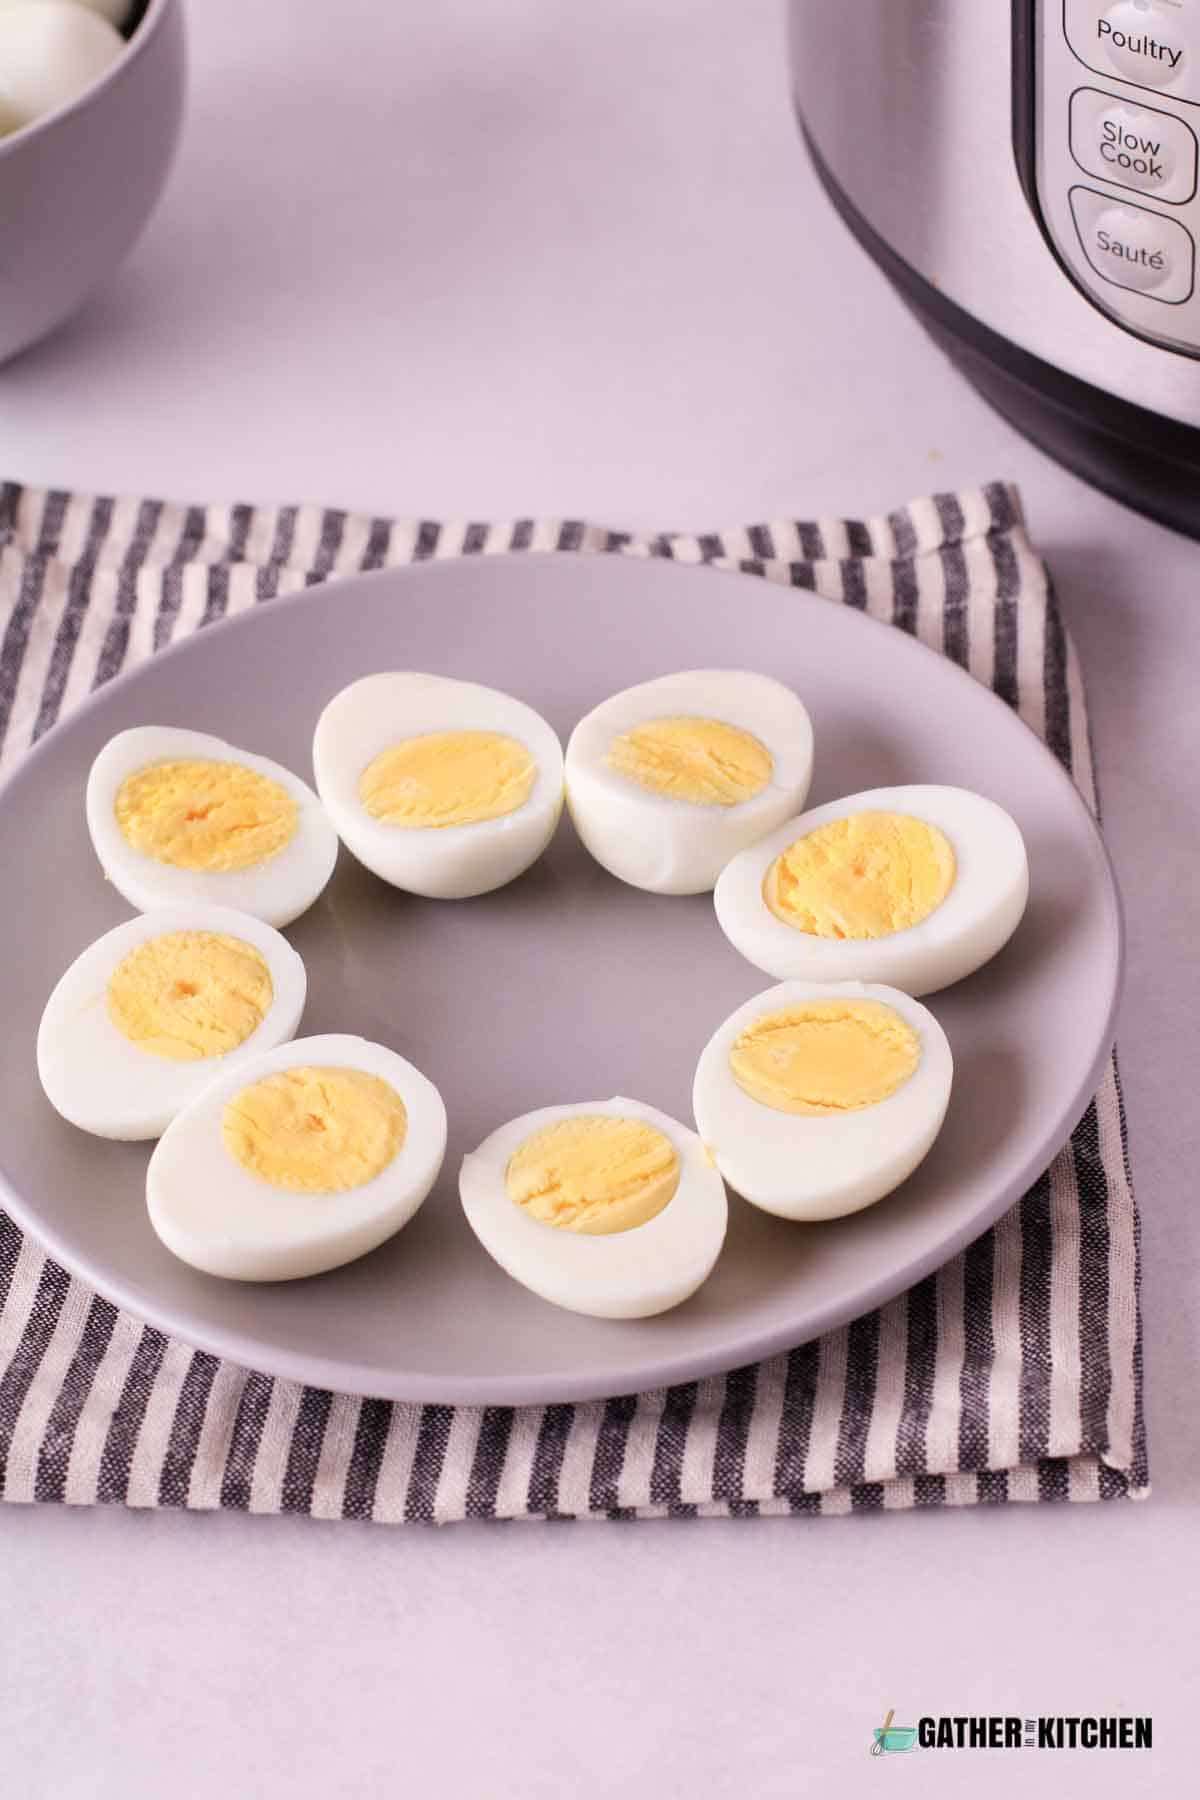 Instant Pot hard boiled eggs cut in half on a plate.